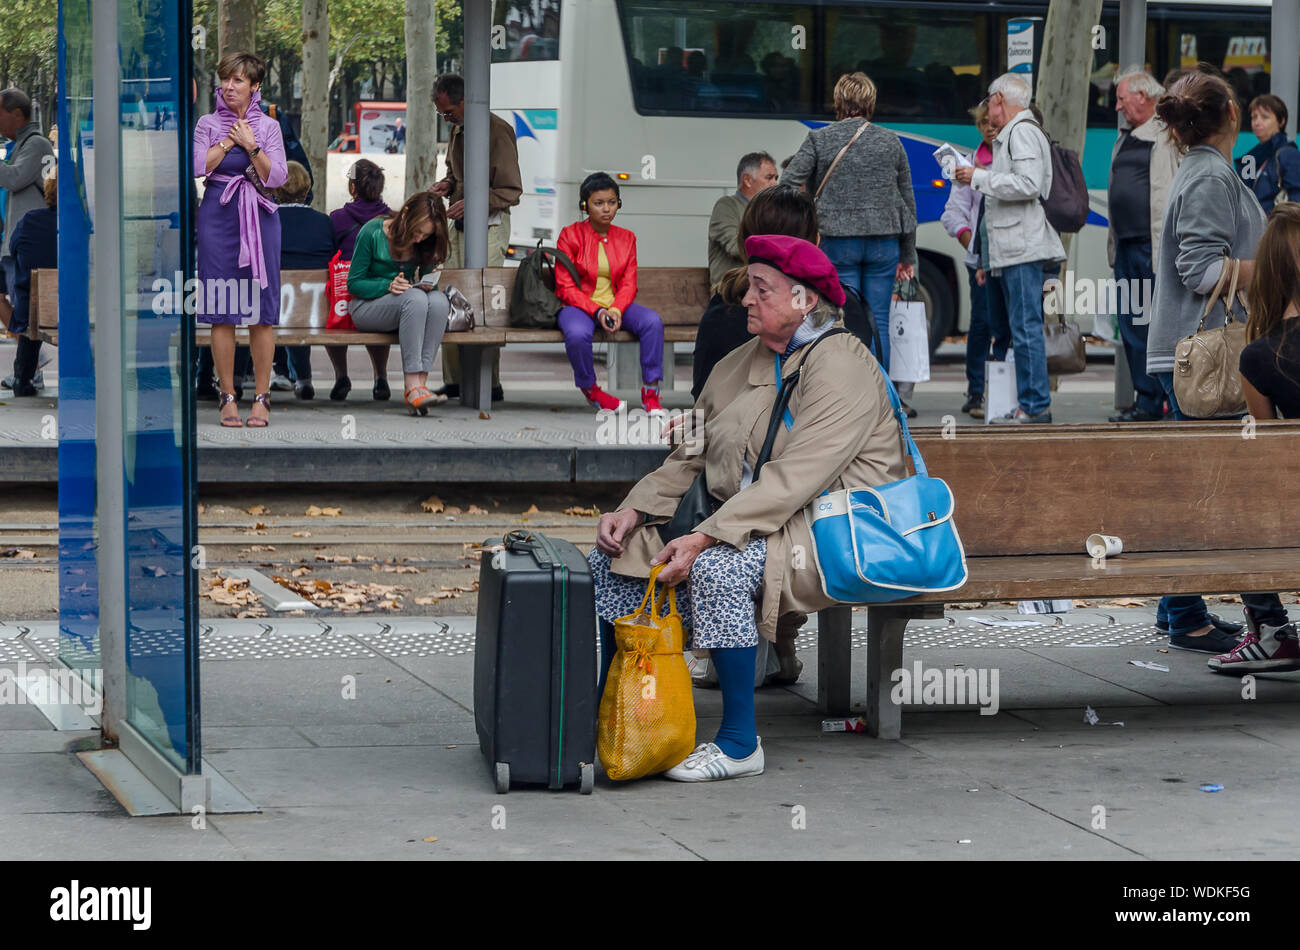 Lady with suitcases and bags waits for the bus sitting in the city of Bordeaux, France, in September 2013 Stock Photo